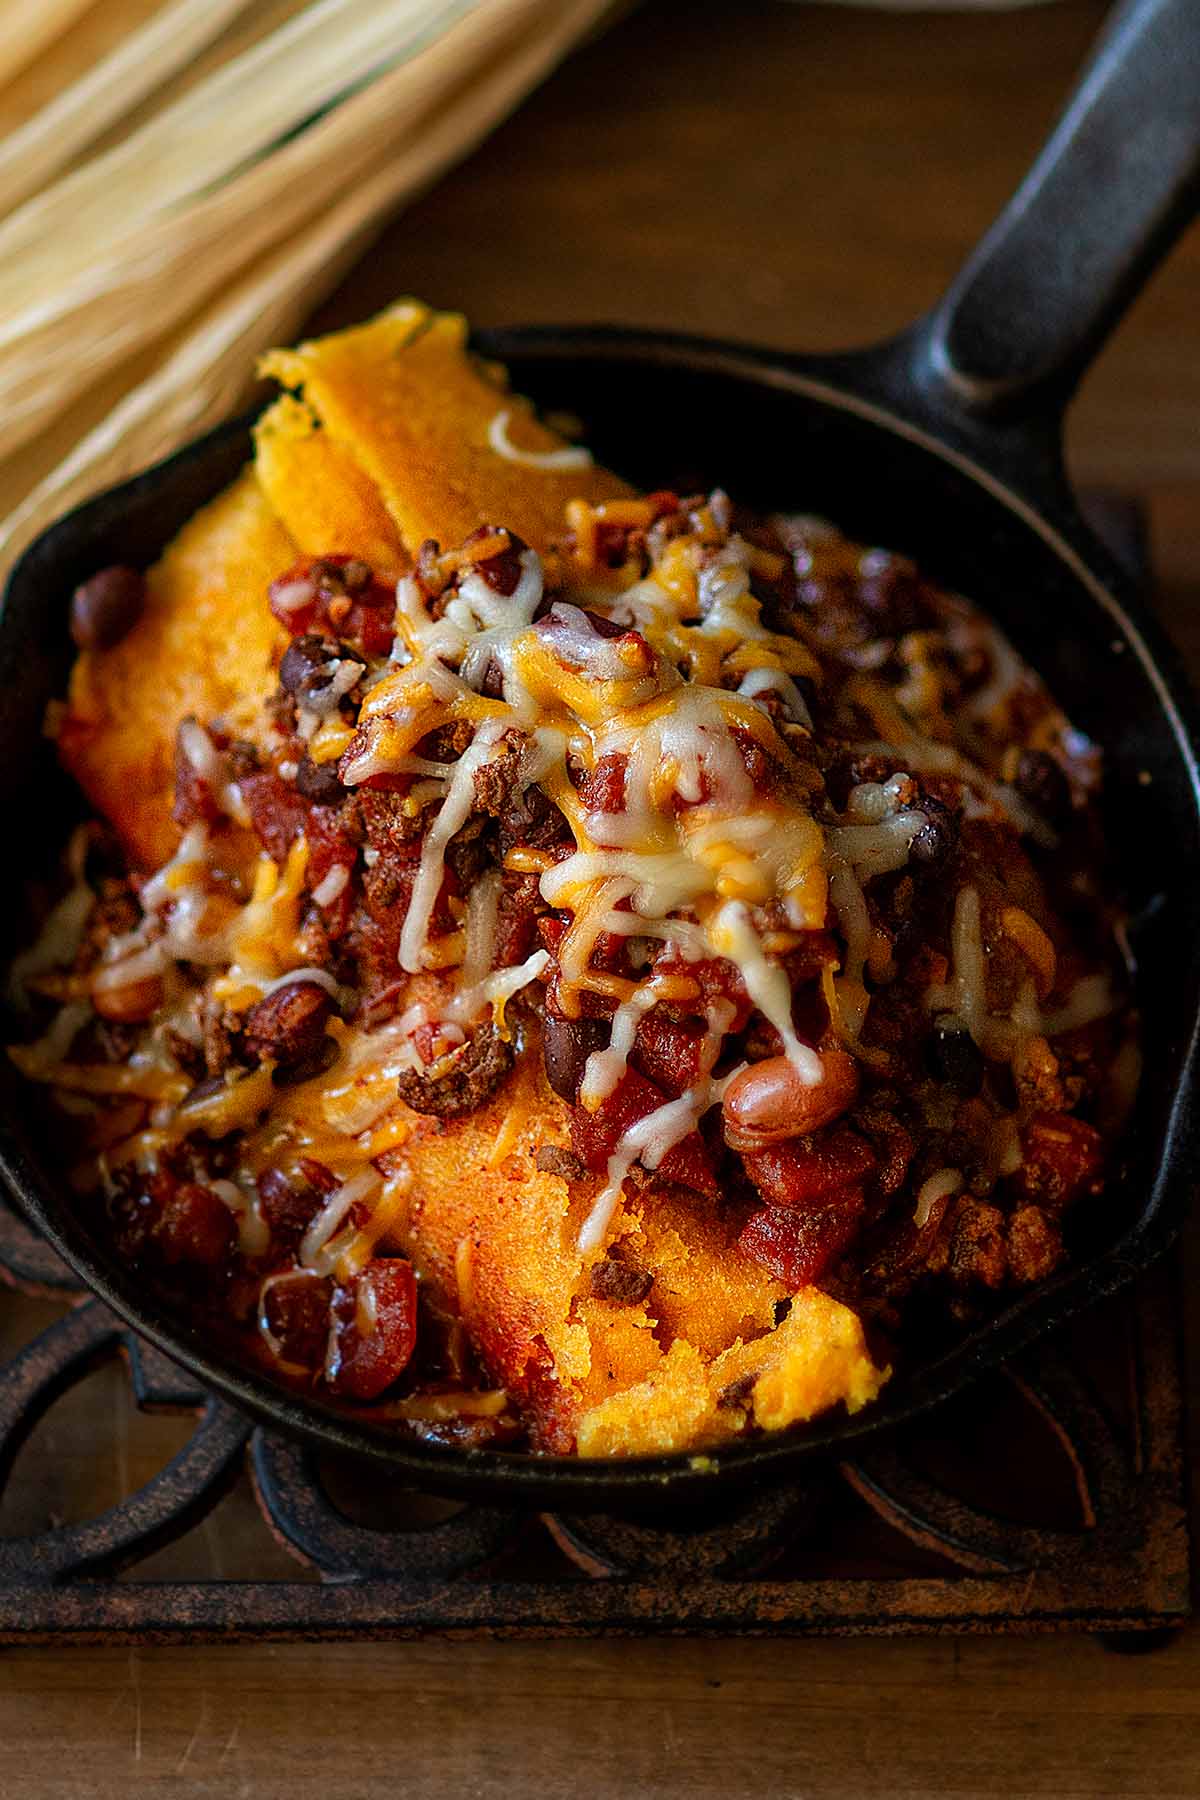 Mississippi Delta Hot Tamales topped with homemade chili and shredded cheese served in a small cast iron skillet.